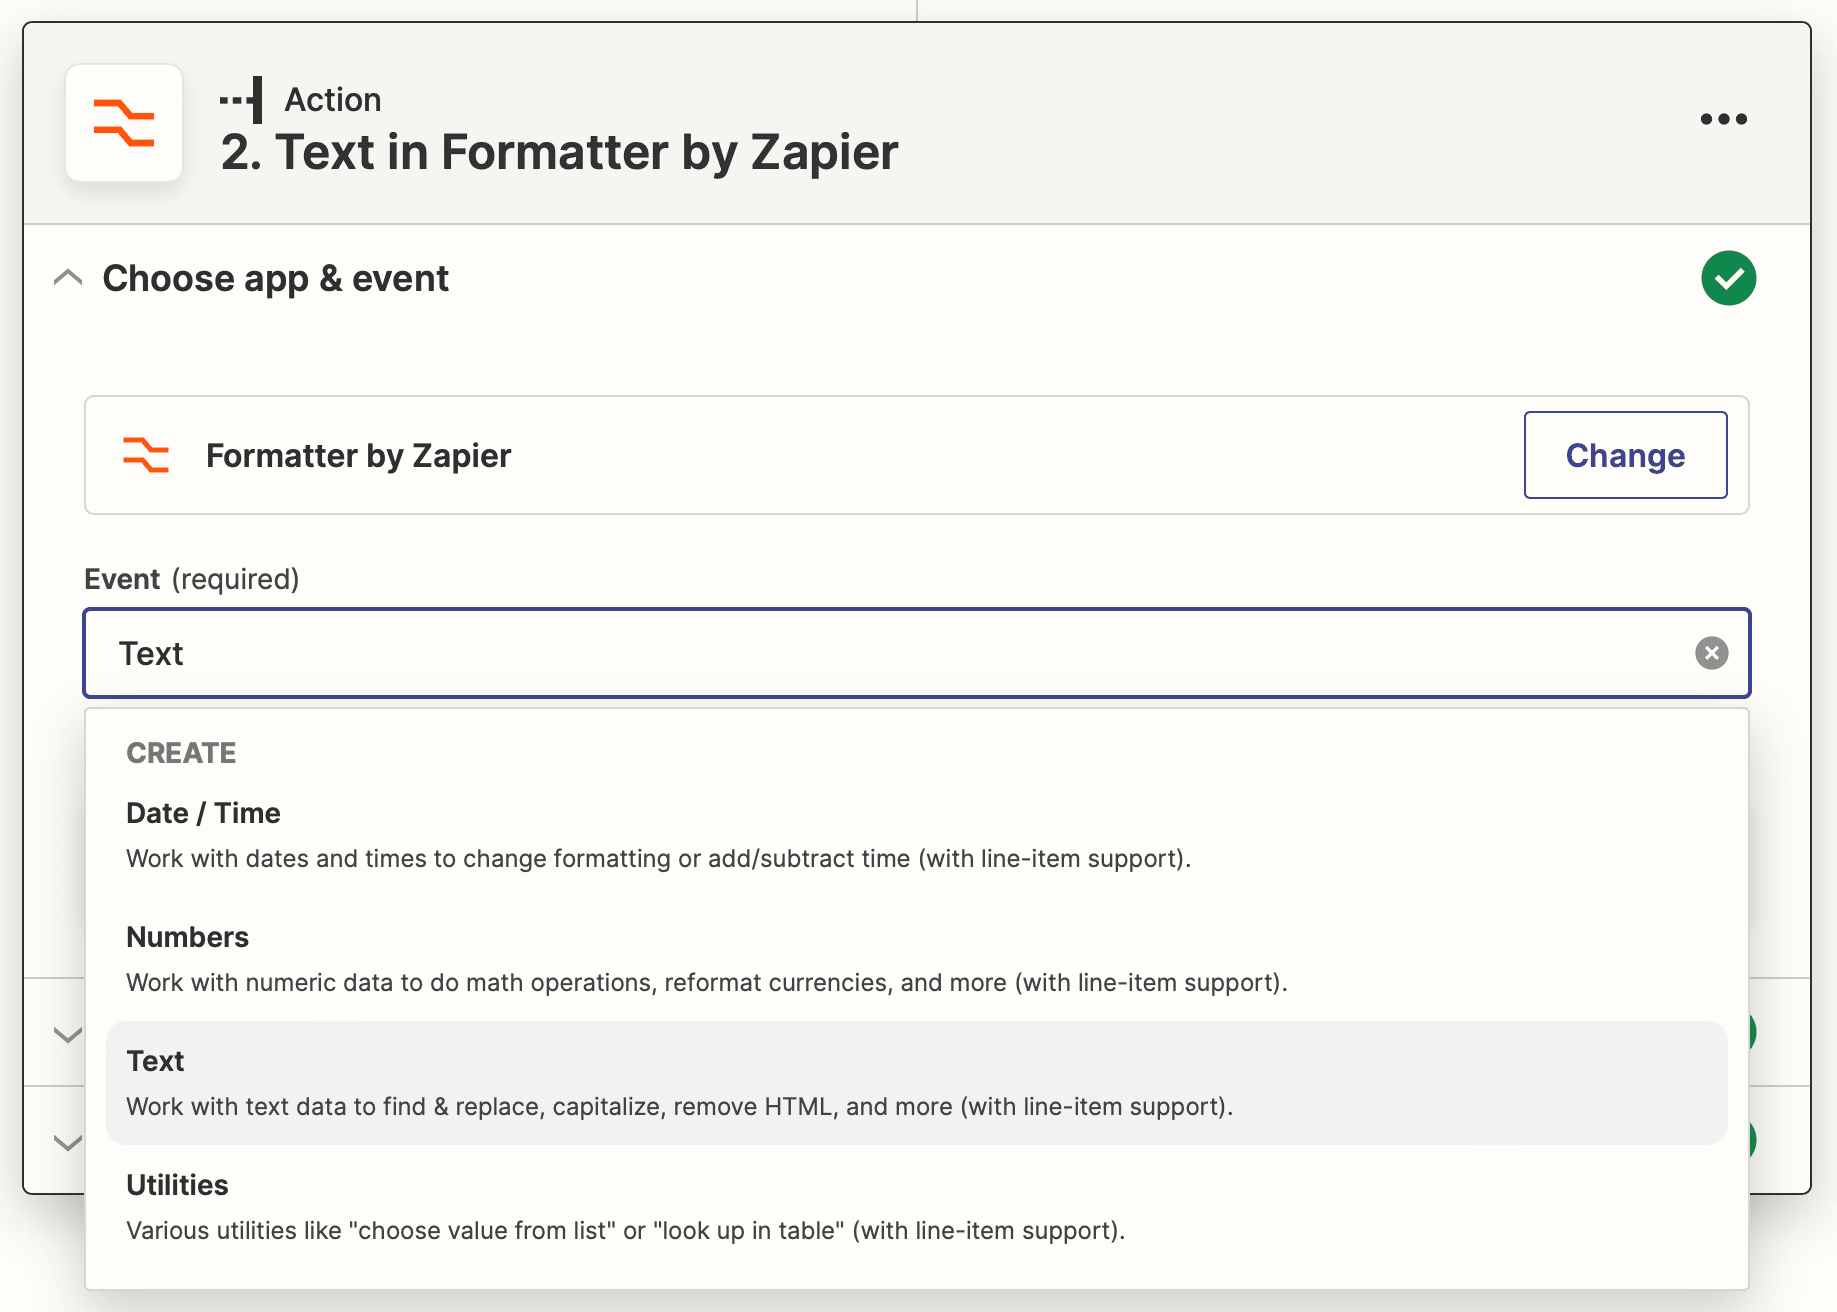 Screenshot of Zapier text in formatter action with event options